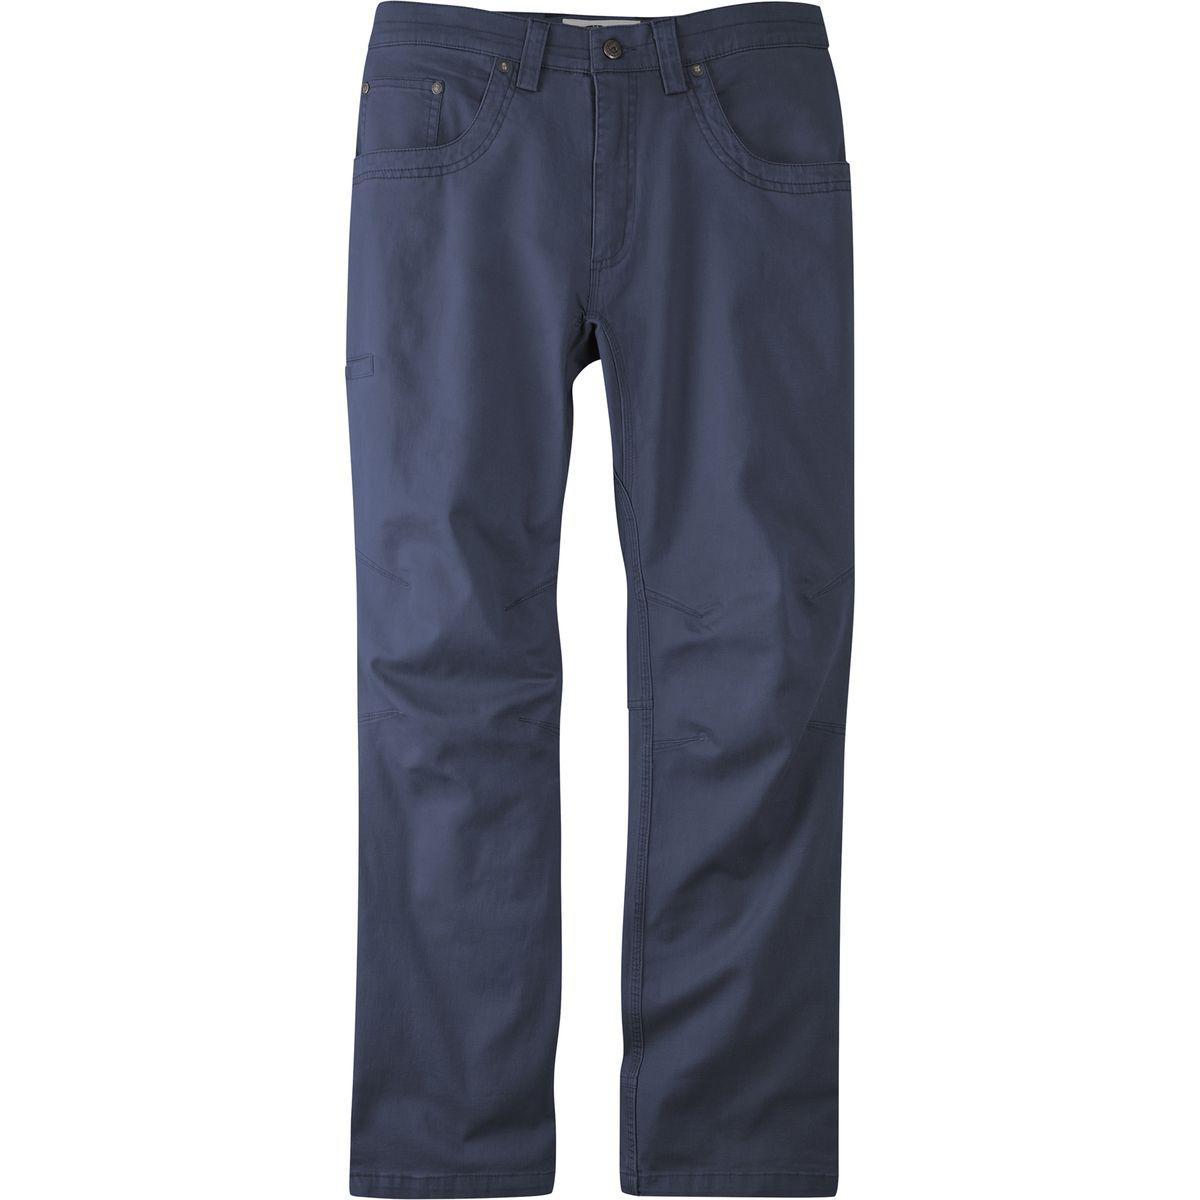 Mountain Khakis Cotton Camber 105 Pant in Navy (Blue) for Men - Save 34 ...